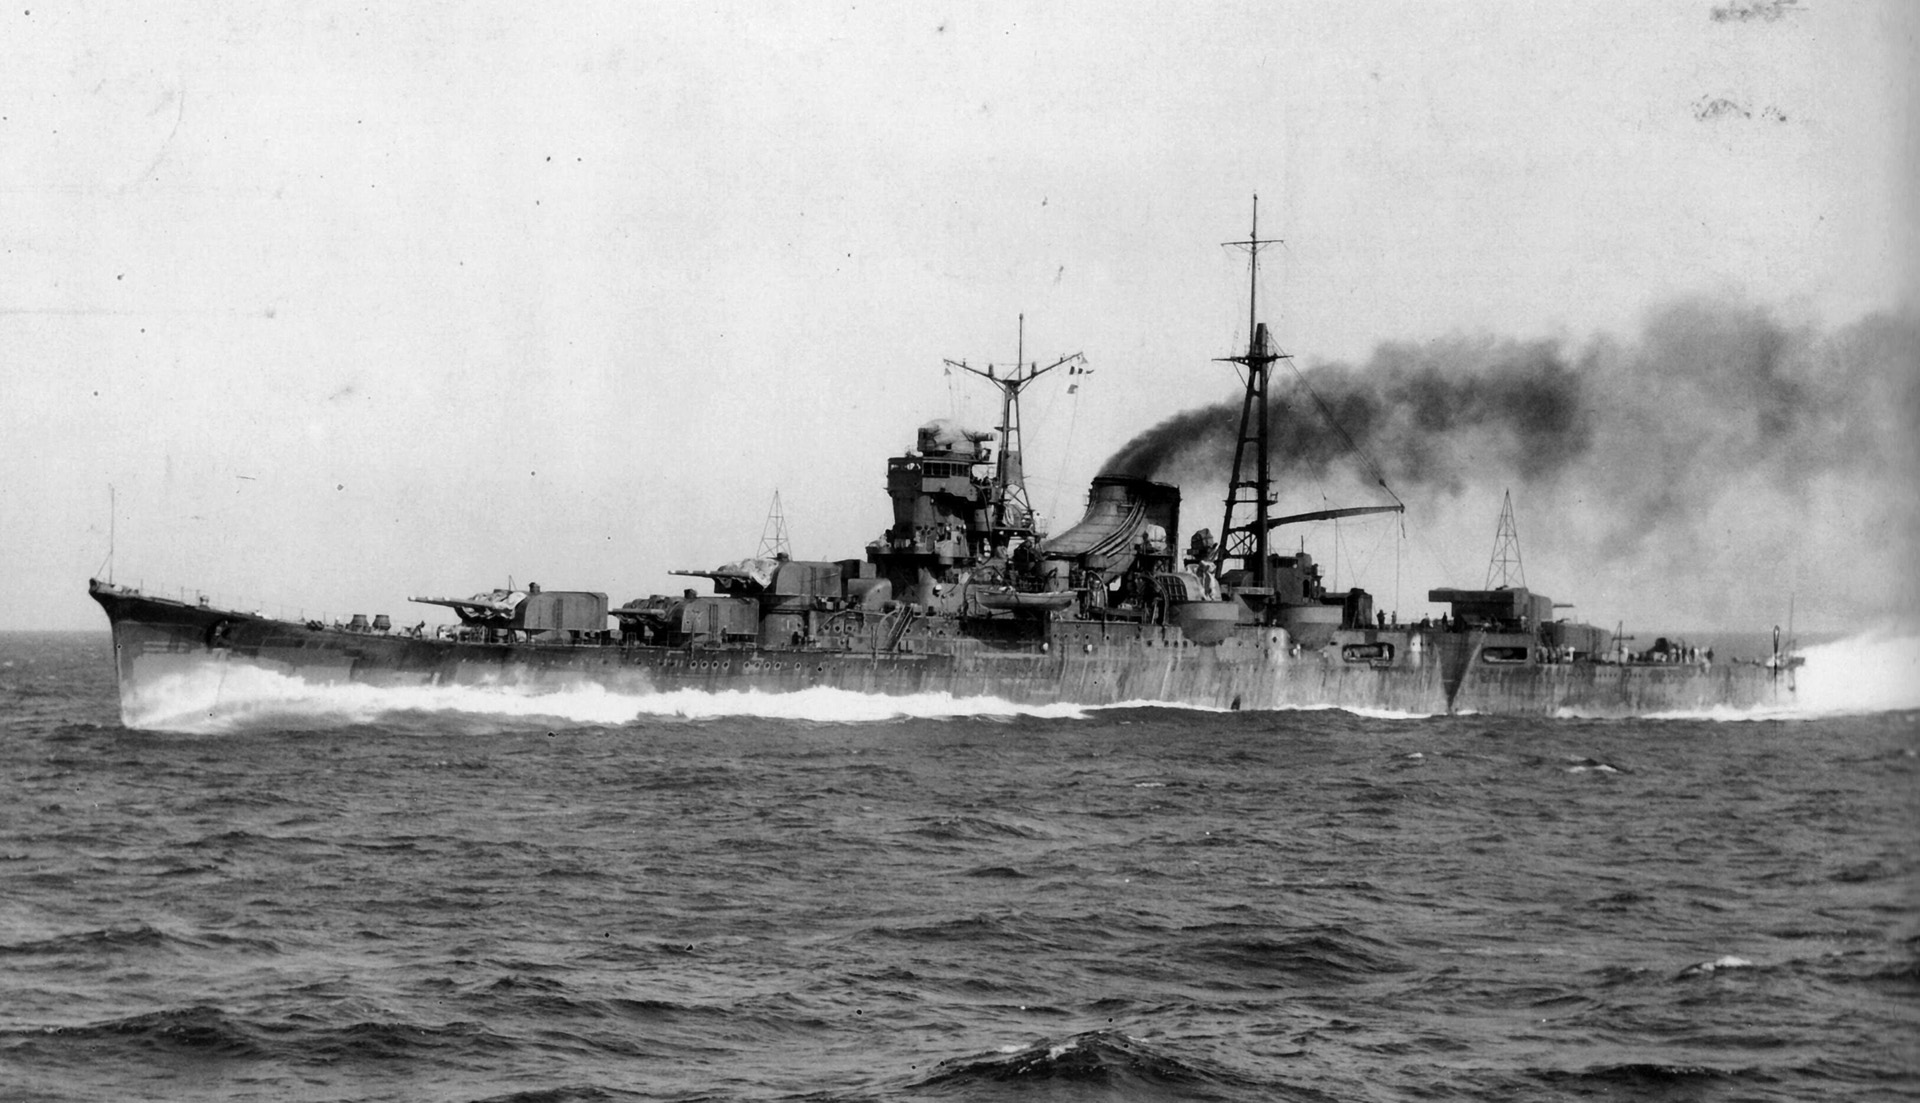 The Japanese heavy cruiser Mogami, photographed before the outbreak of World War II, steams high speed. Mogami ‘s career was lengthy but plagued with mishaps. 